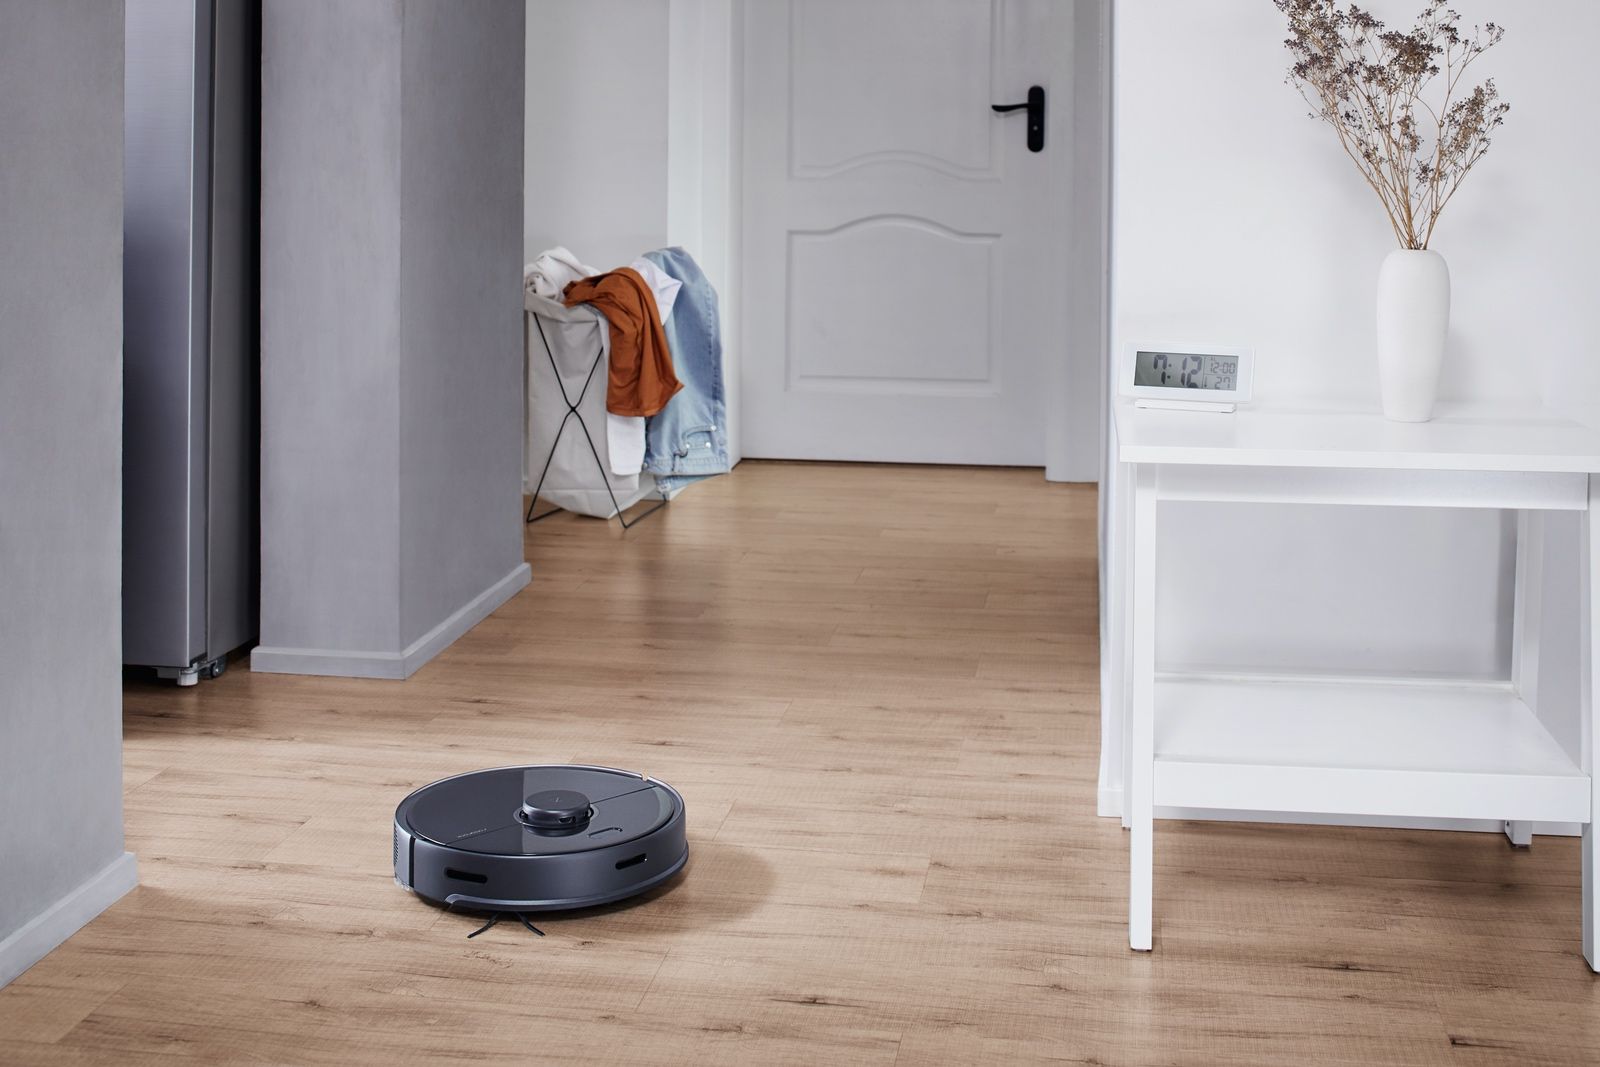 Roborock Makes Some Of The Best Value Vacuums You Can Buy - But Who Are They image 2